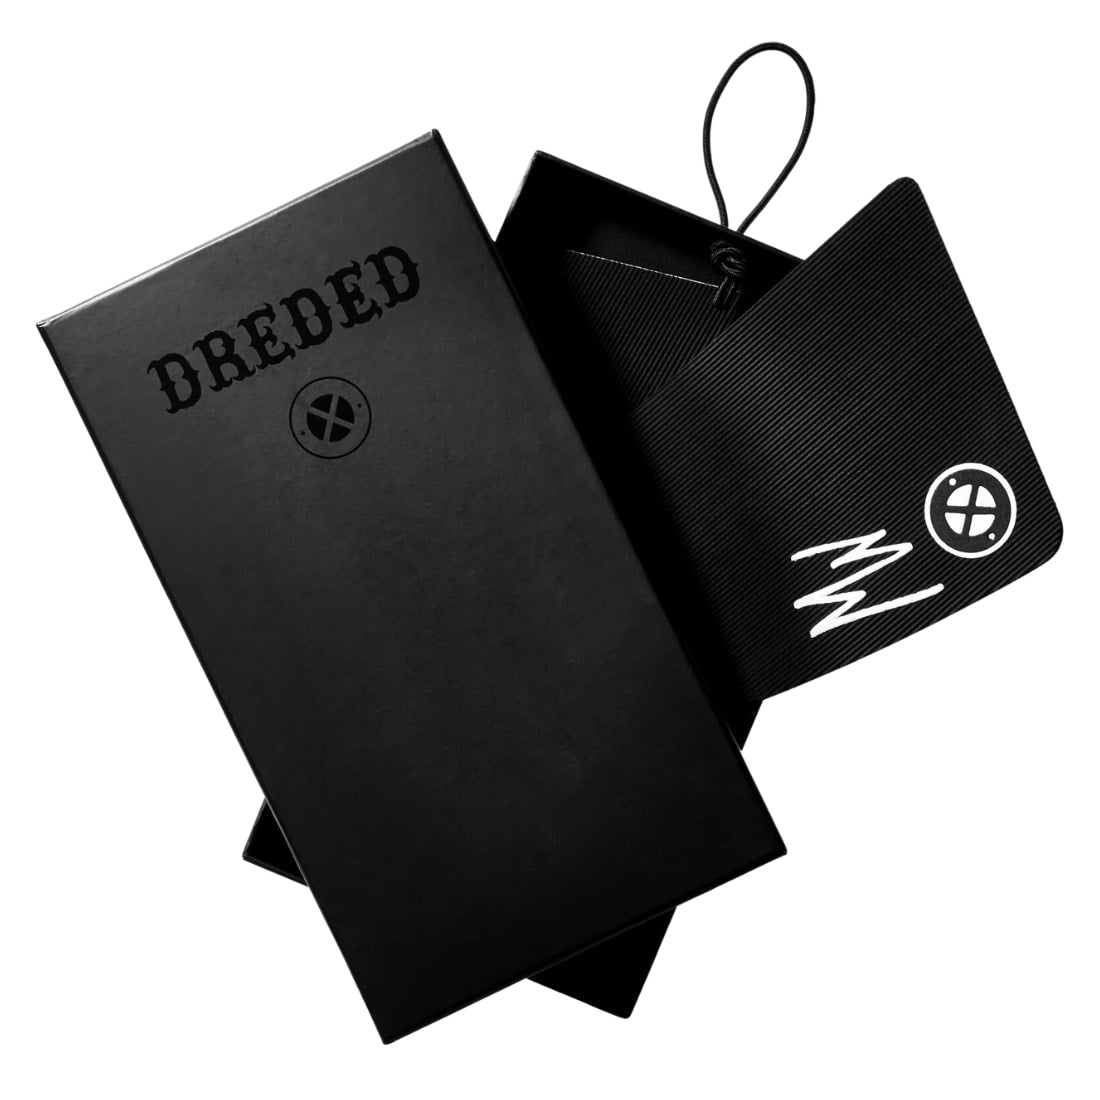 Dreded Mikey Wright Signature Tail Pad - Black